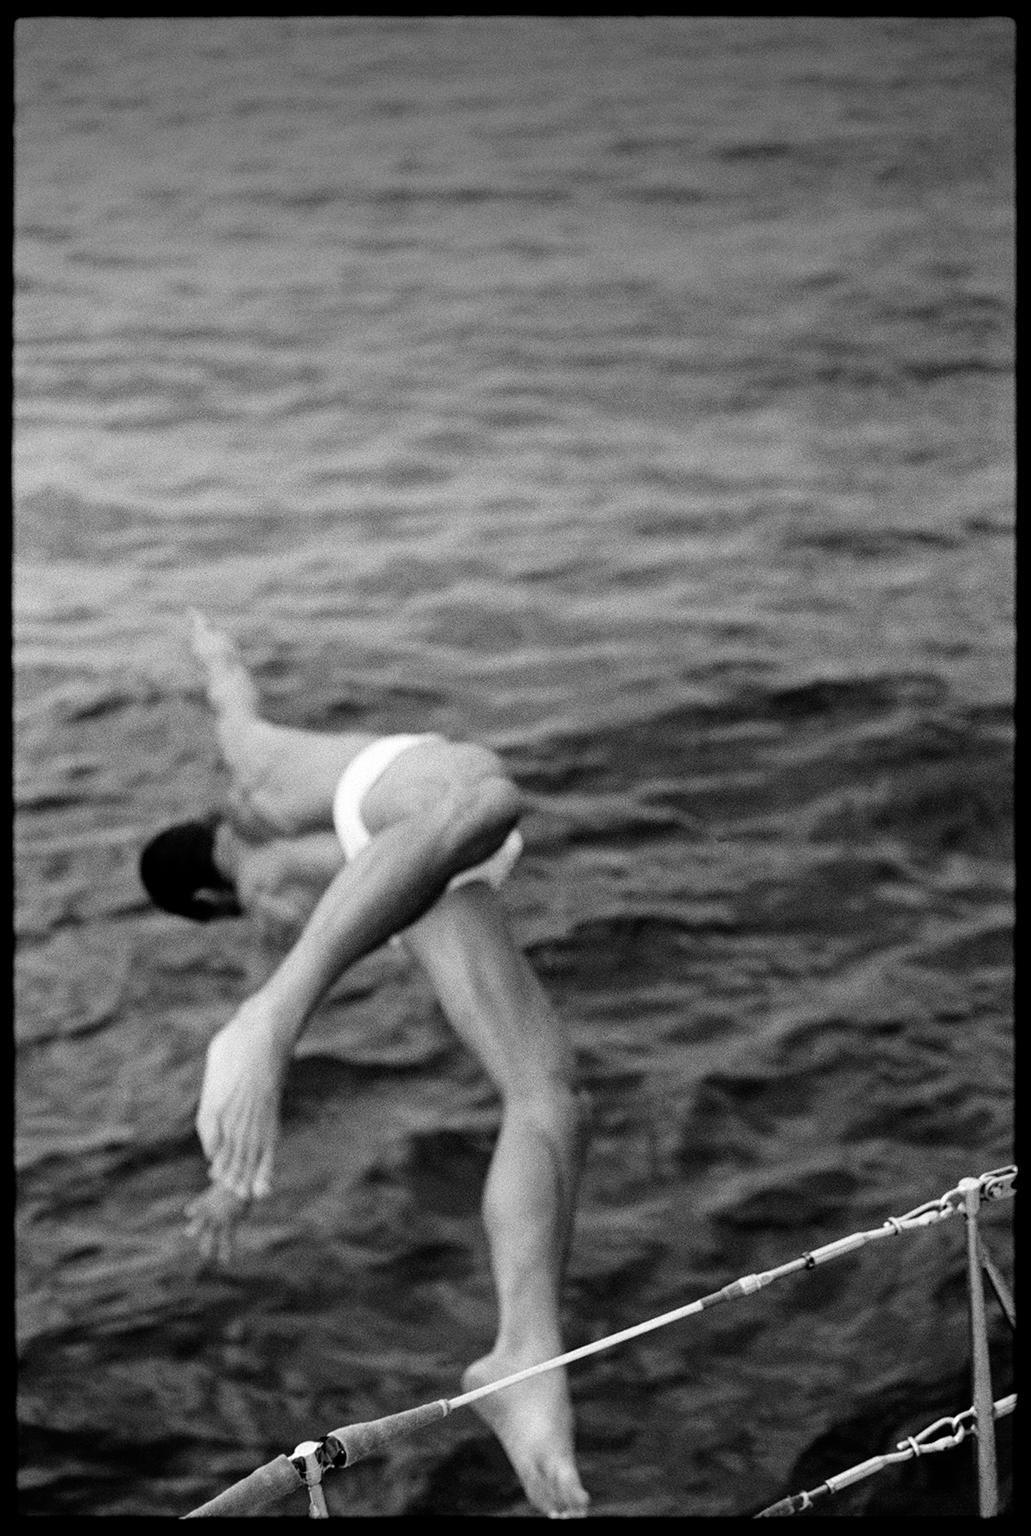 Jean-Luc Fievet Figurative Photograph - 1993-Paulo Italie - Black and White Photograph of Man Diving From Sailing Boat